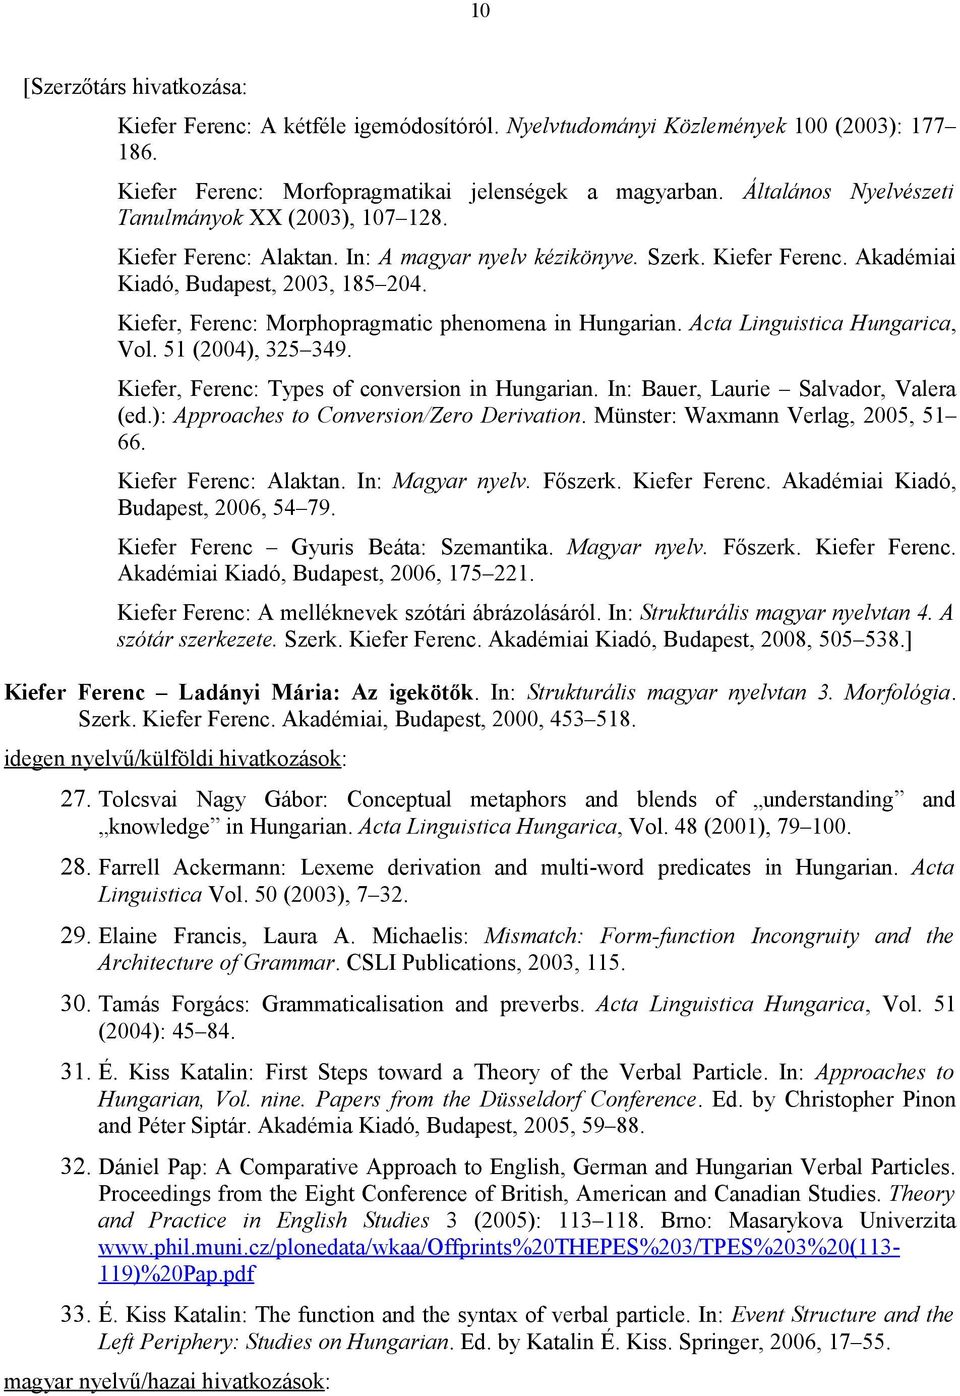 Kiefer, Ferenc: Morphopragmatic phenomena in Hungarian. Acta Linguistica Hungarica, Vol. 51 (2004), 325 349. Kiefer, Ferenc: Types of conversion in Hungarian. In: Bauer, Laurie Salvador, Valera (ed.